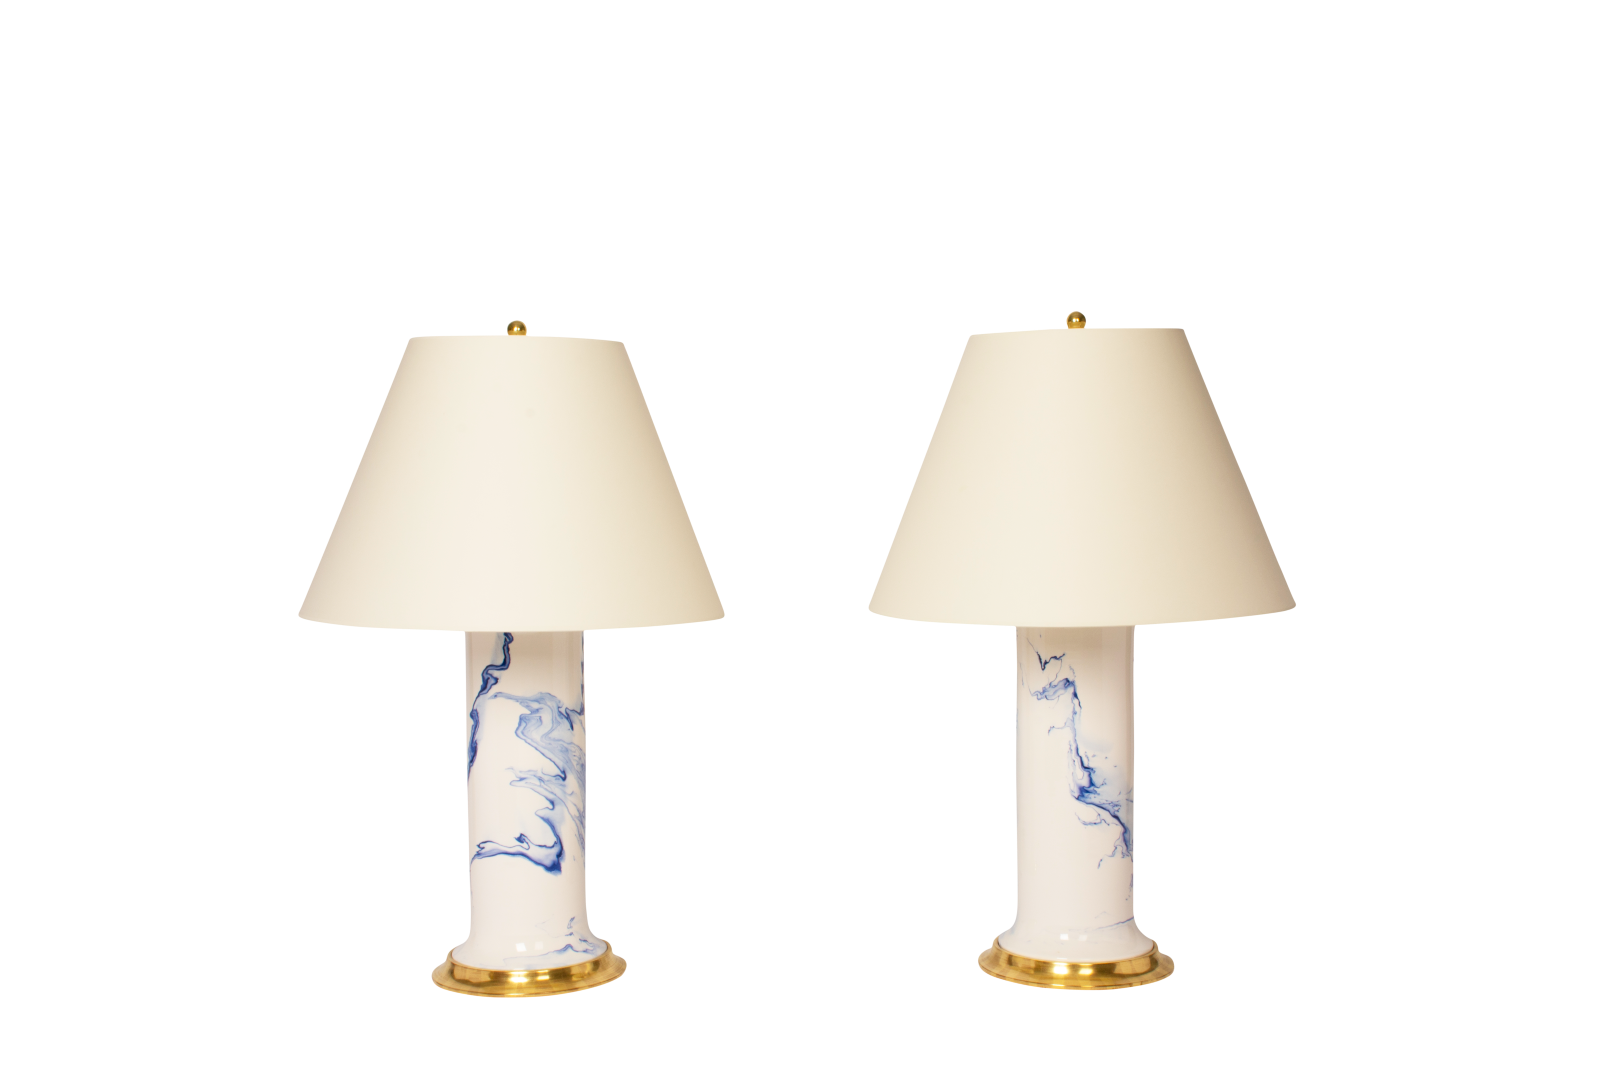 Patricia Large Lamp Pair in Delft Blue Marble